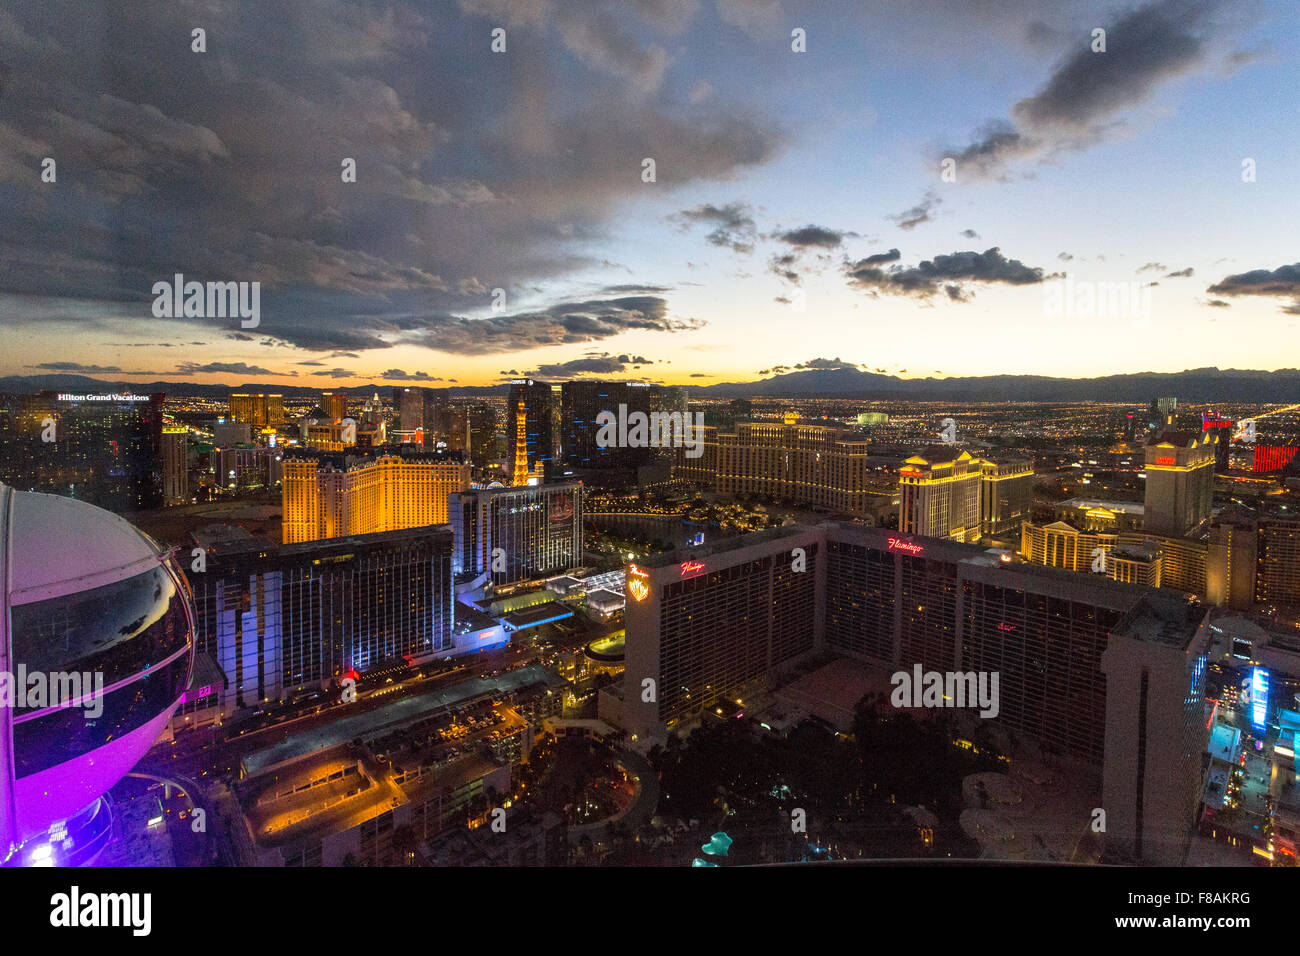 Aerial view of Las Vegas from the top of the High Roller ferris wheel at the Linq - Las Vegas, NV Stock Photo